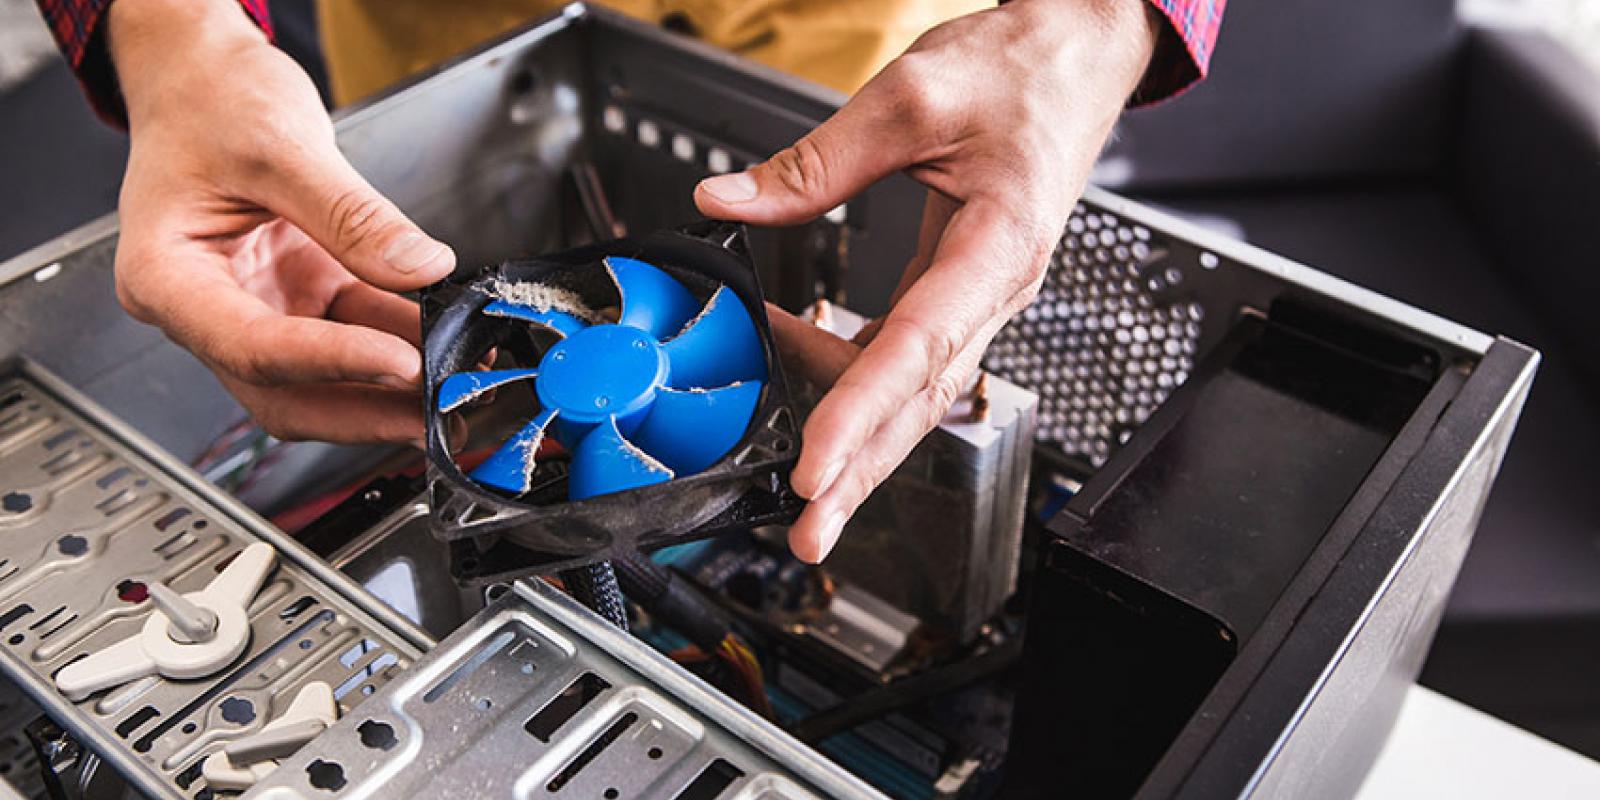 Dirt computer fan being cleaned